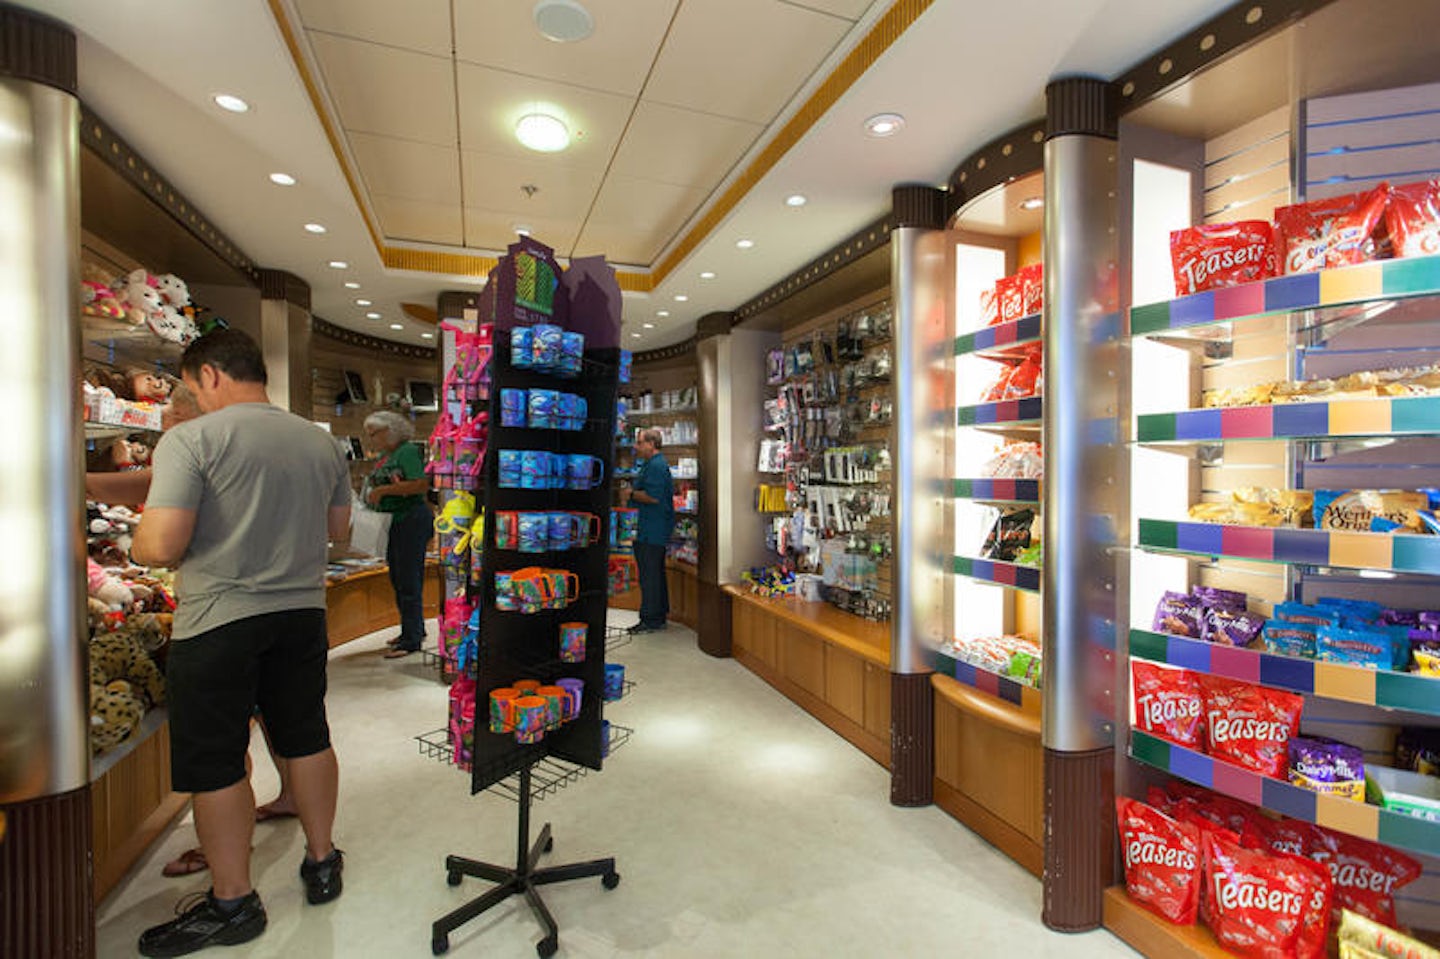 Tax & Duty Free Emporium on Independence of the Seas